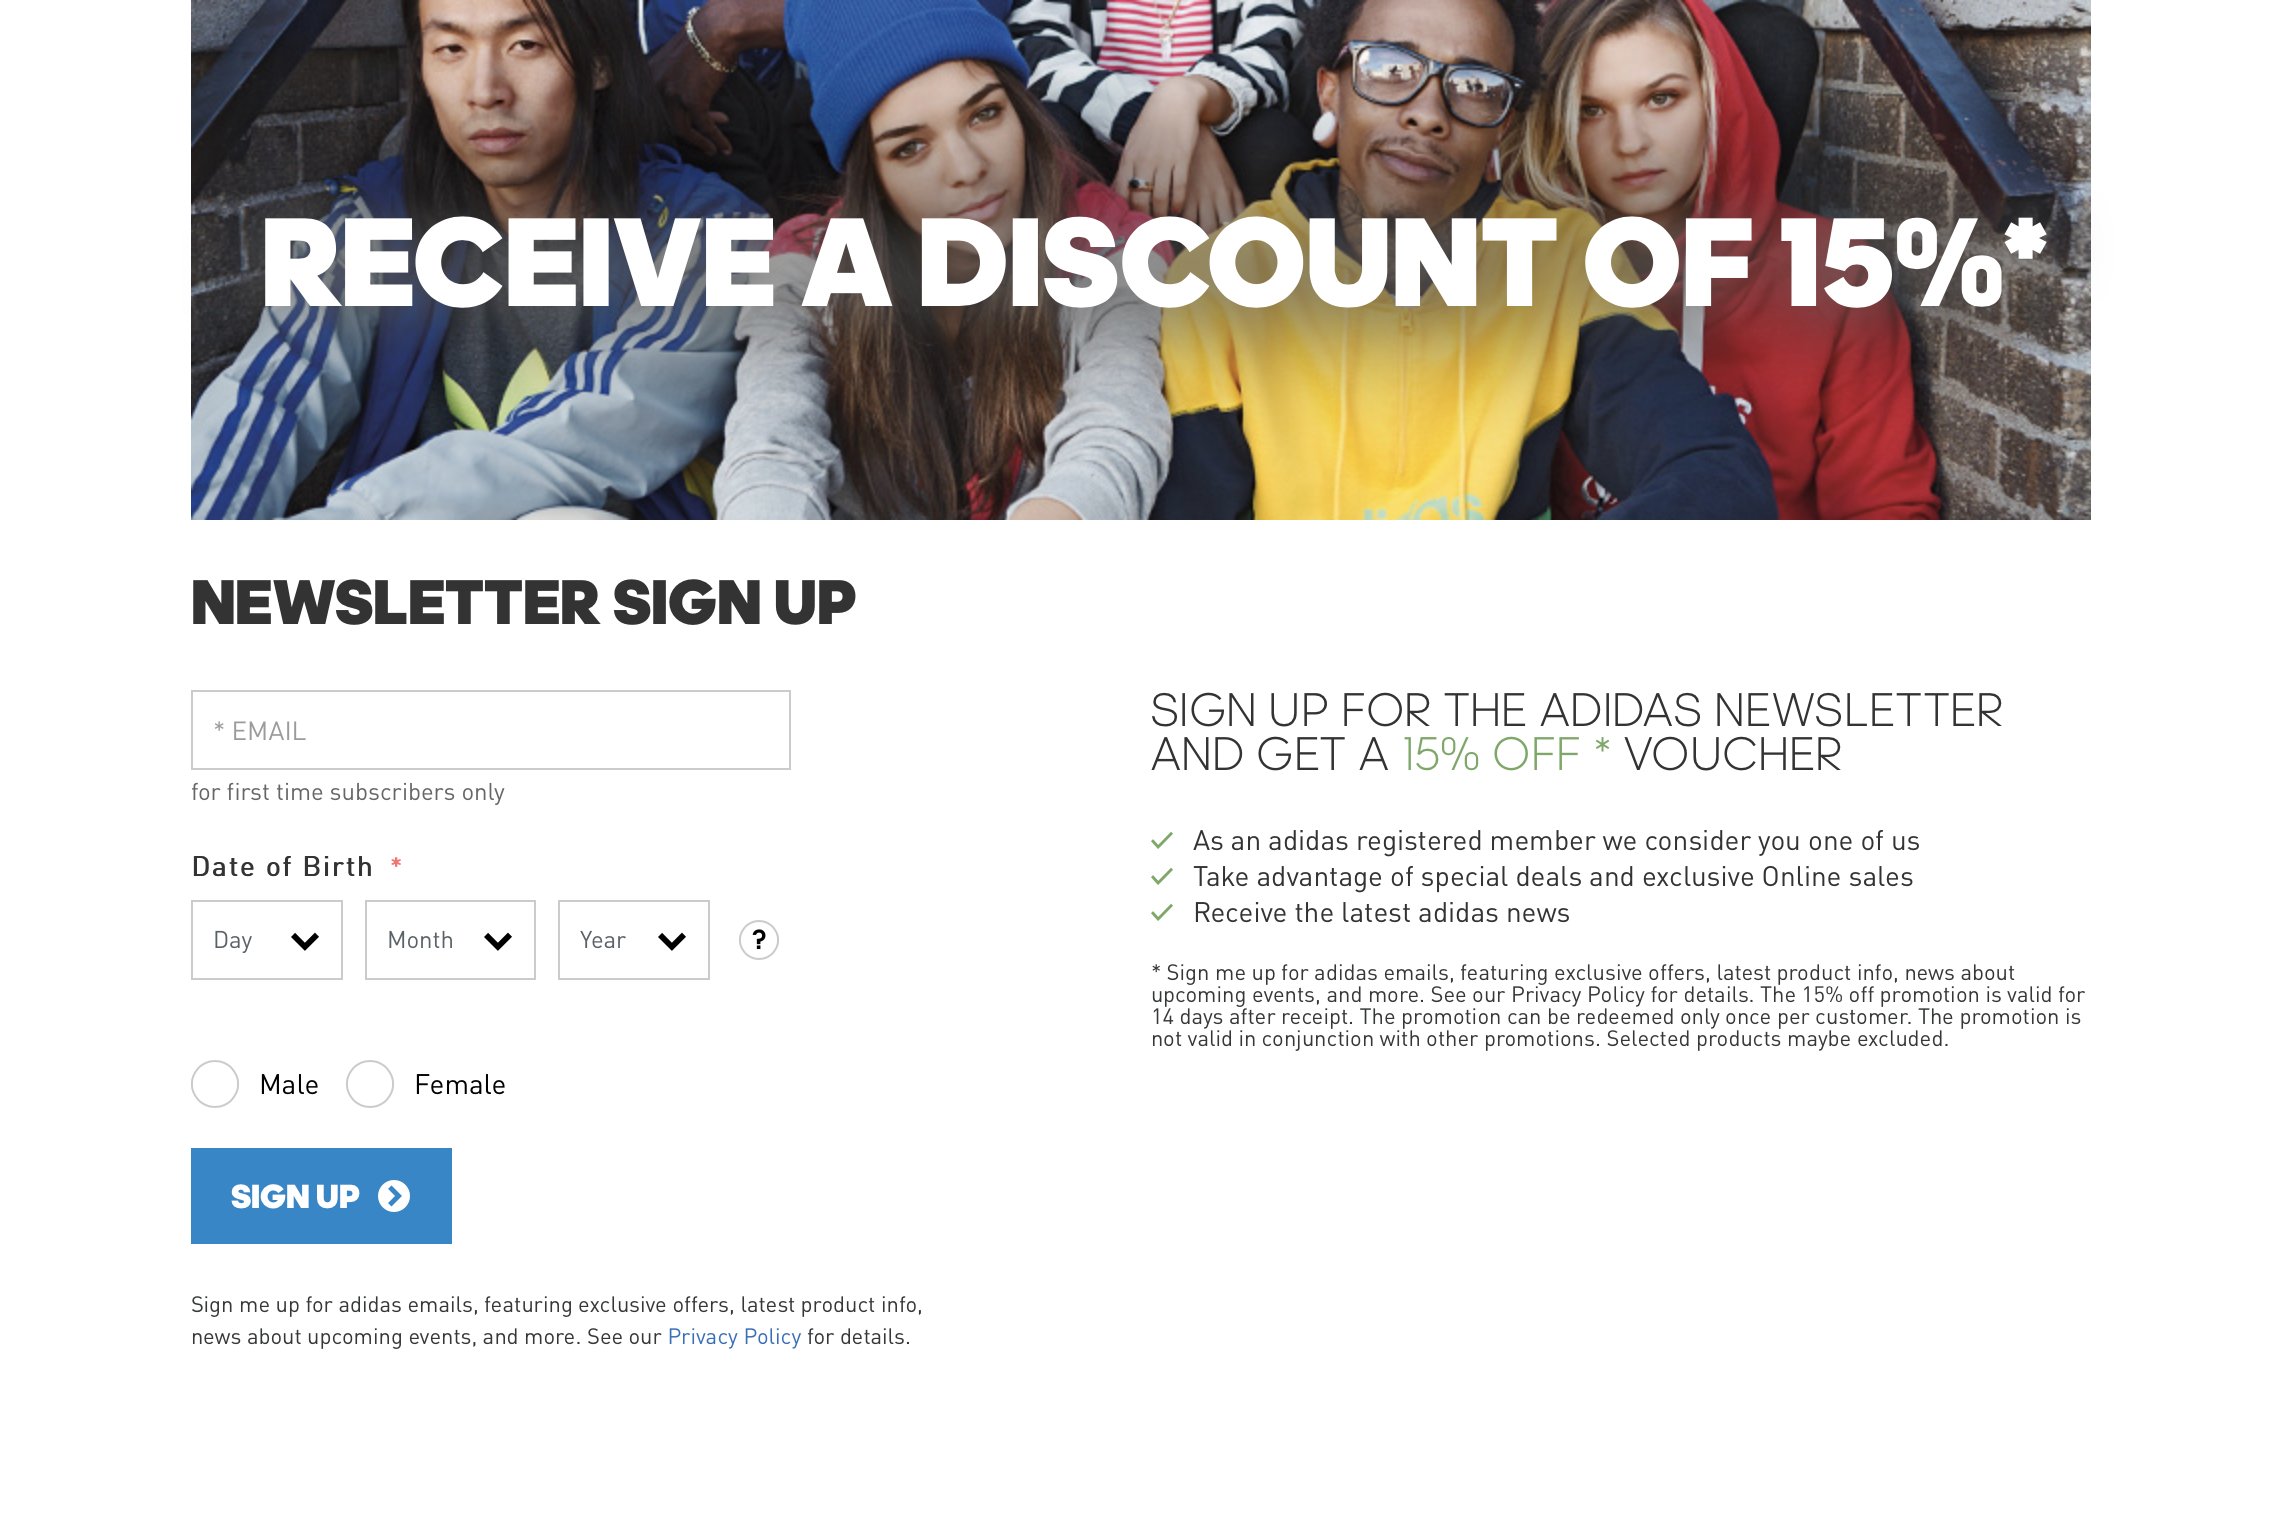 adidas alerts on Twitter: "Get 15% off February New Arrivals on #adidas US  by signing up for the adidas Newsletter. SIGN UP https://t.co/Jgb1a0fa1Q  https://t.co/3mZRaKWdyr" / Twitter